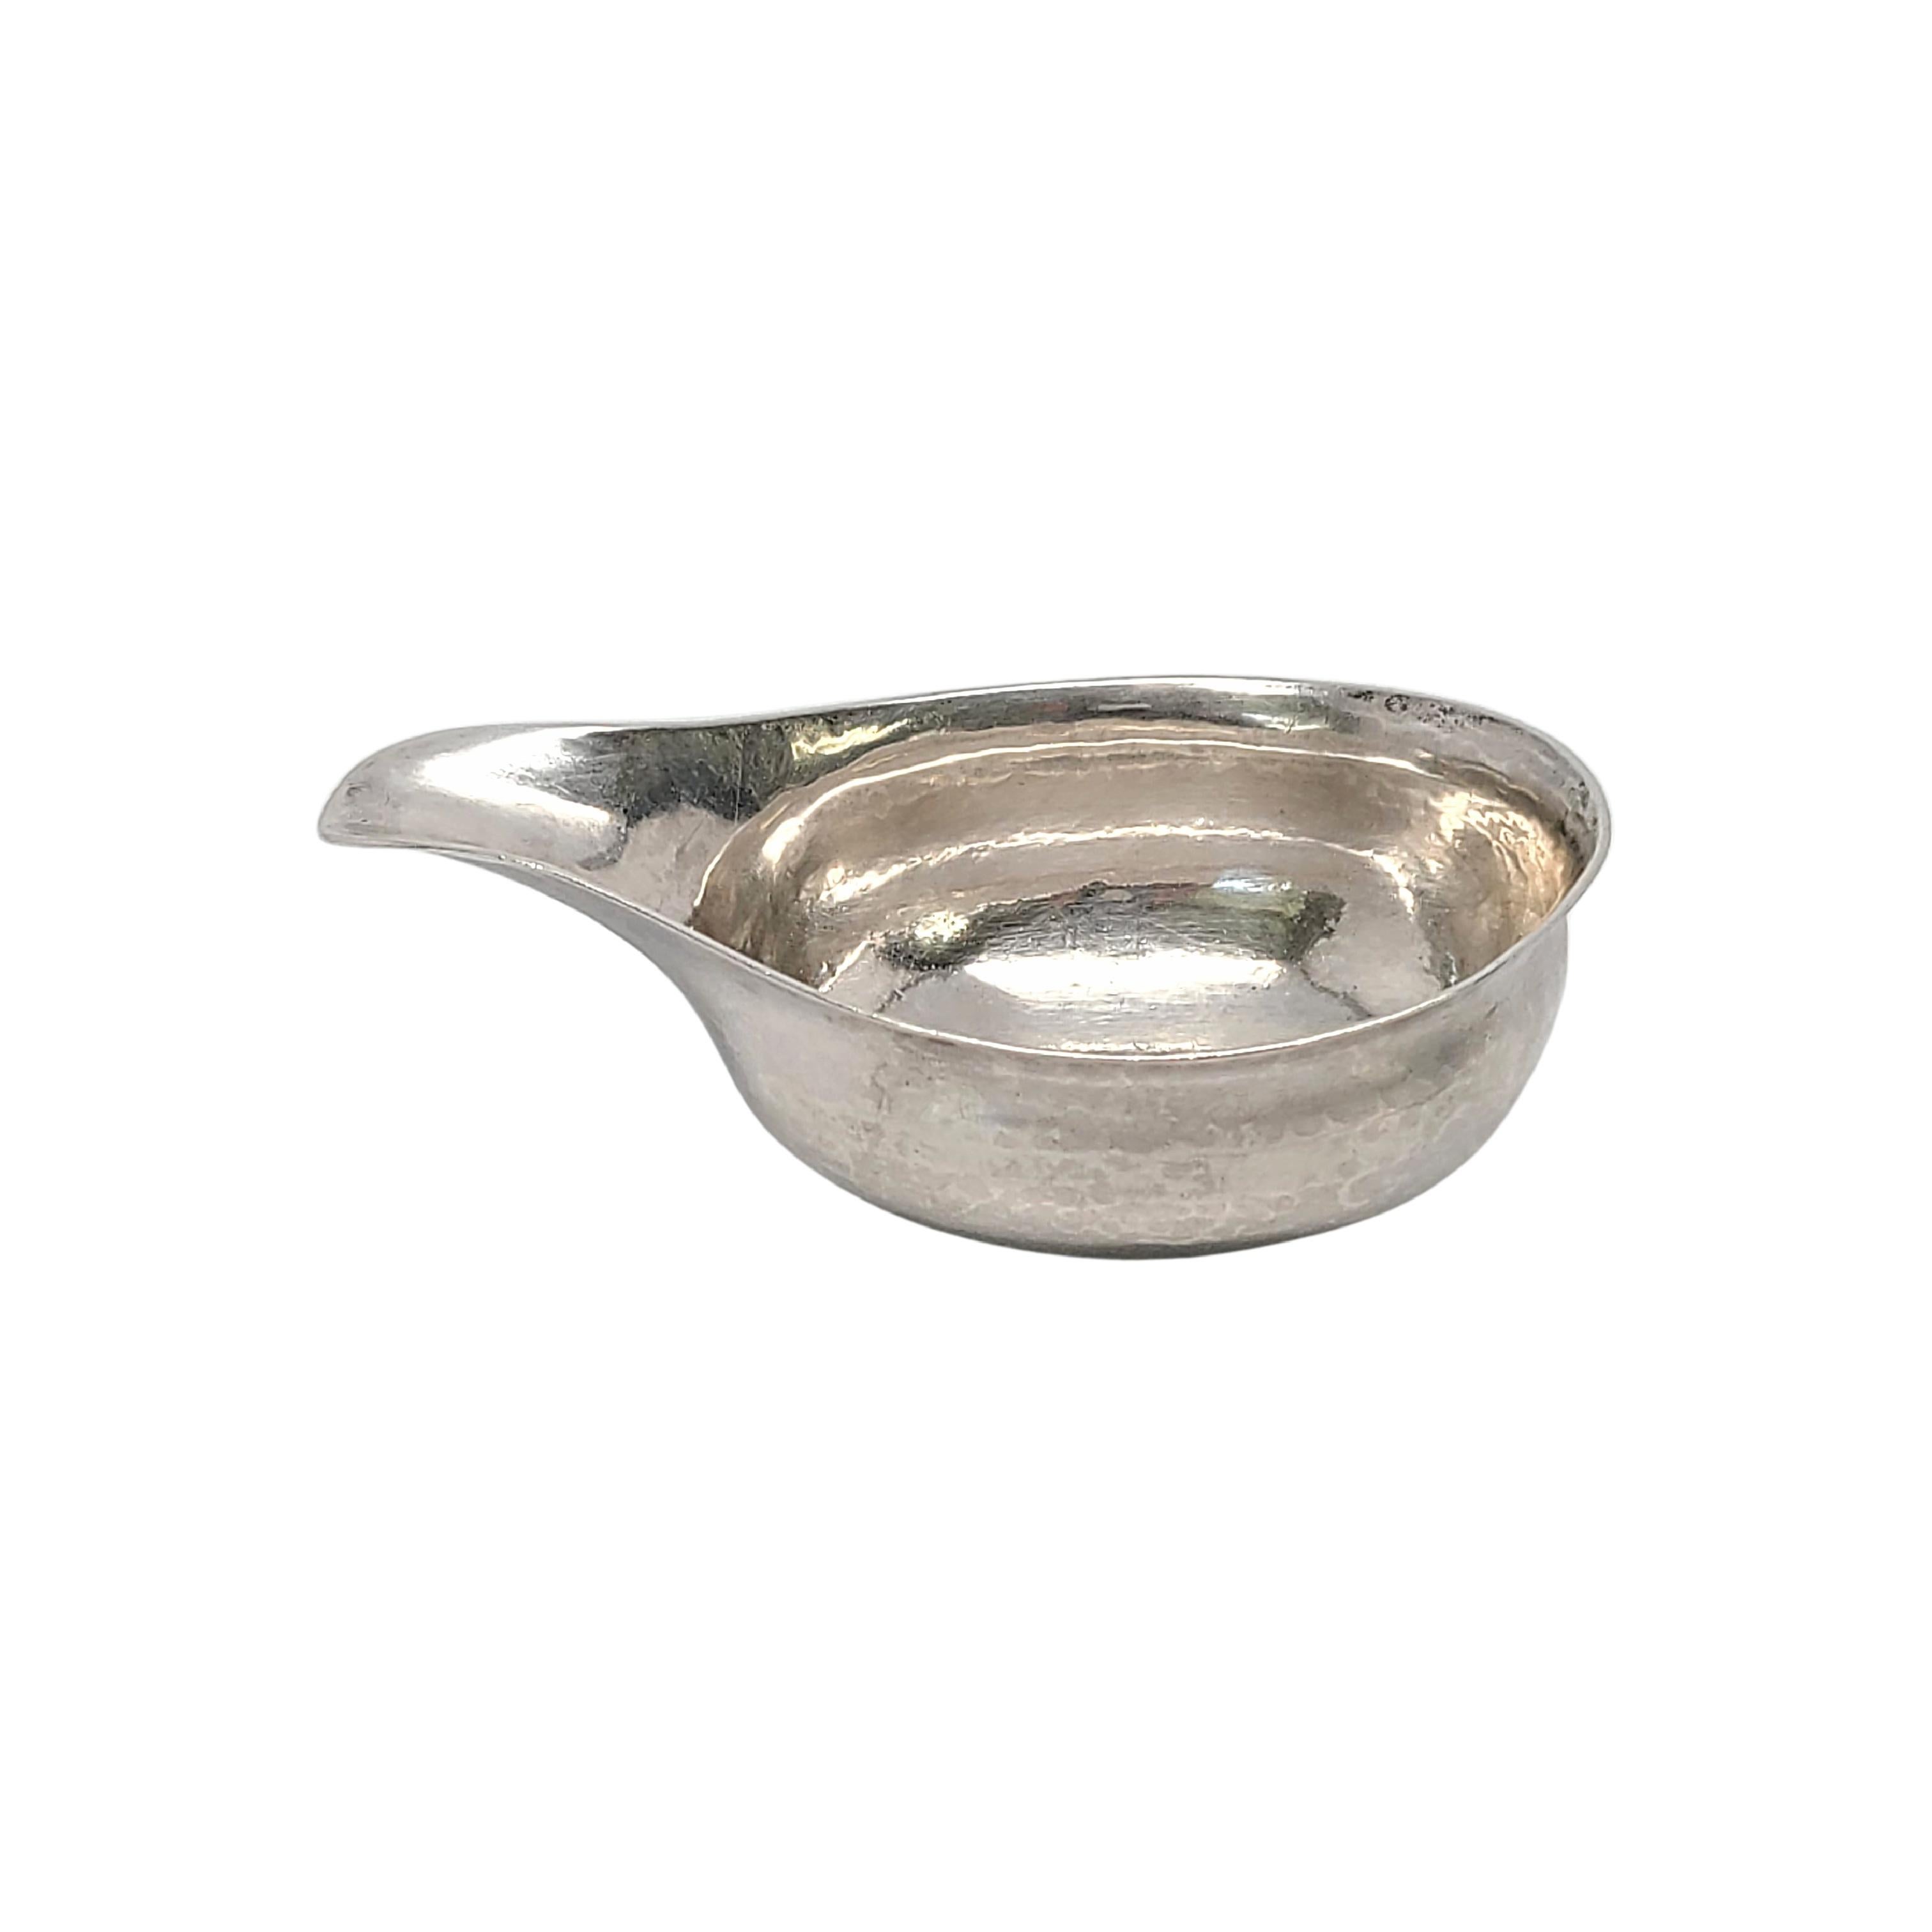 Women's or Men's English Sterling Silver Pap Boat 1783